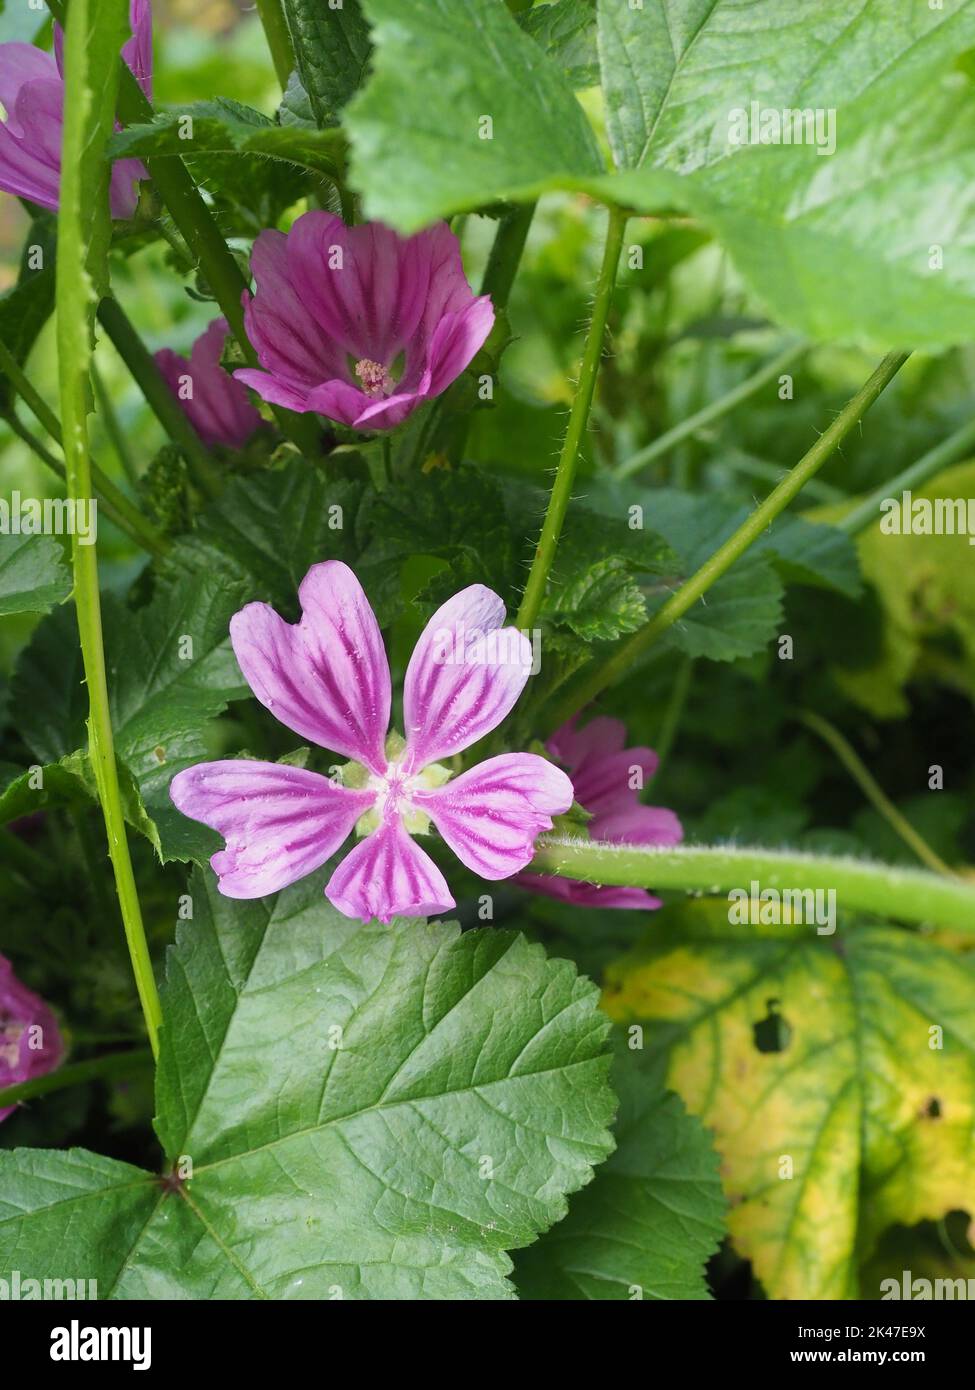 Malva is a genus of herbaceous annual, biennial, and perennial plants in the family Malvaceae. Common English name mallow flower and leaves. Stock Photo